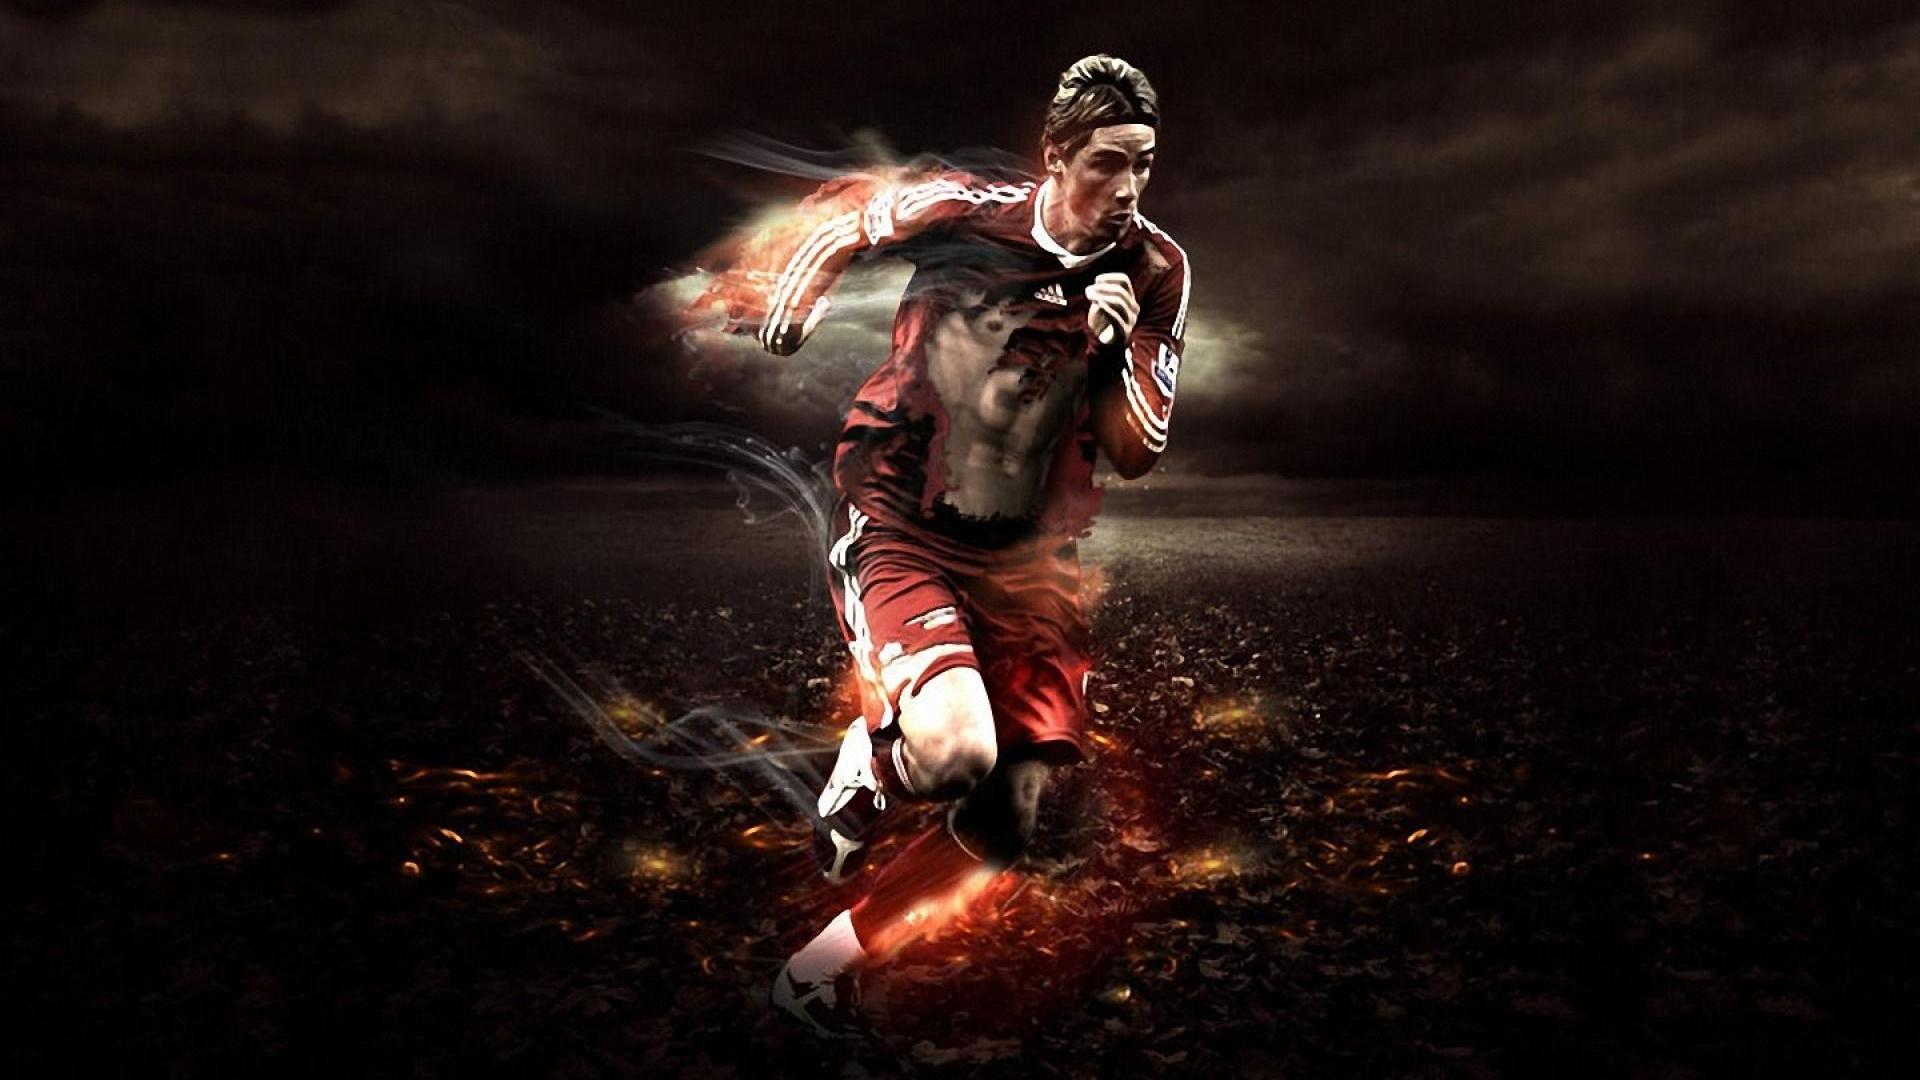 soccer player wallpapers,football player,photography,flash photography,darkness,graphic design